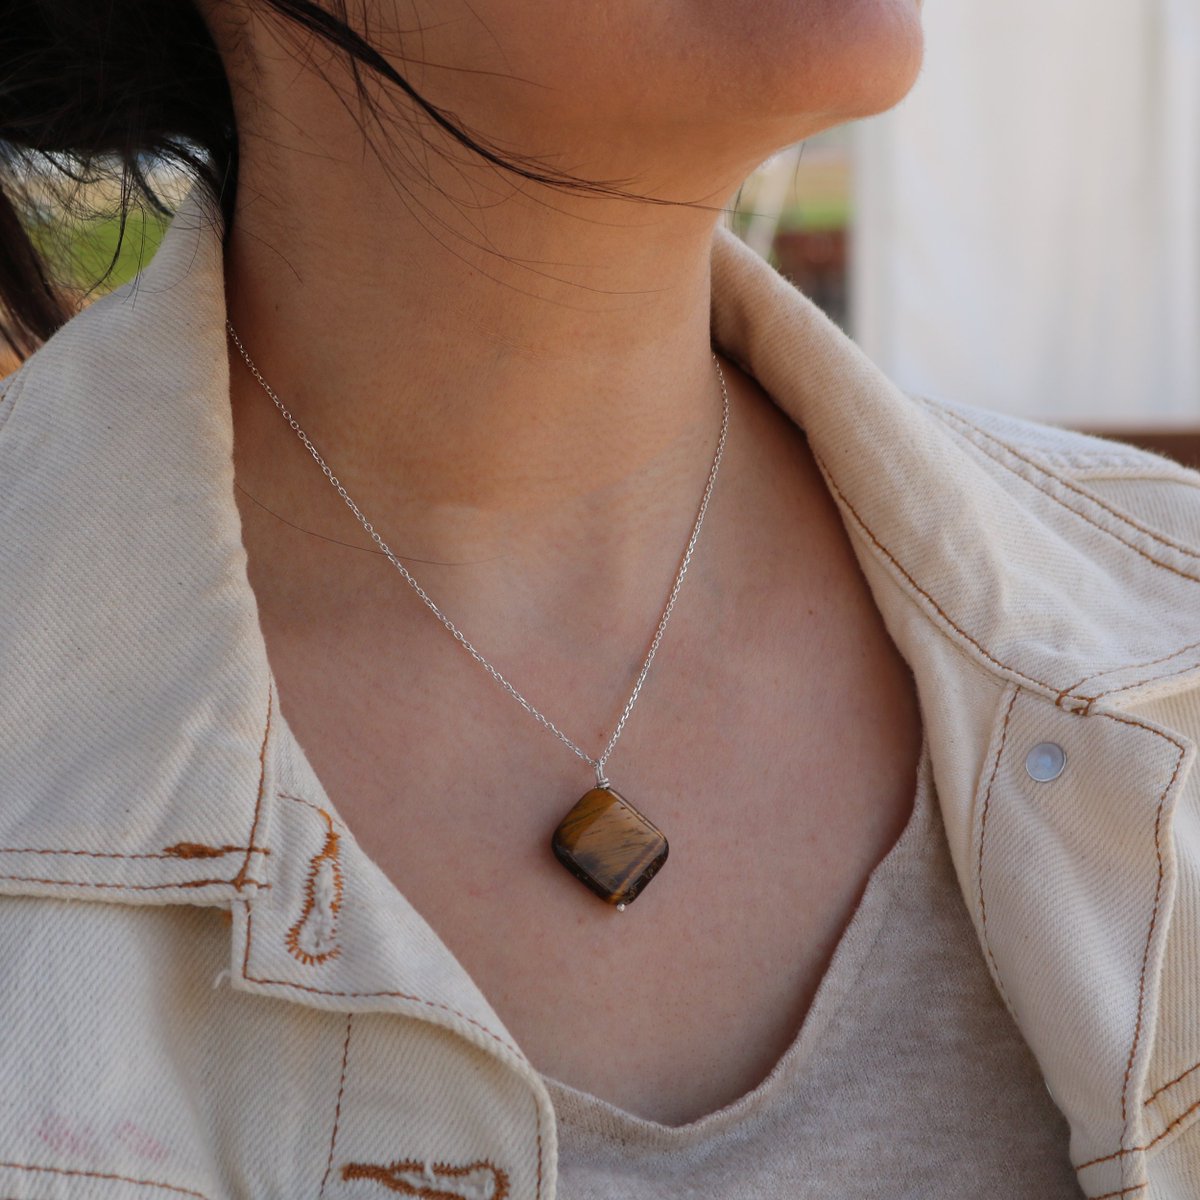 Natural Large Brown Tiger Eye Pendant Necklace with Silver Chain

(US-only)

amazon.com/dp/B07CL9C8BK

#Streetwear #StreetStyle #UrbanWear #SimpleFits #DailyLook #MinimalMovement #UrbanFashion #Urban #Casual #StreetFashion #WhatIWore #FashionDaily #StreetLook #LookOfTheDay